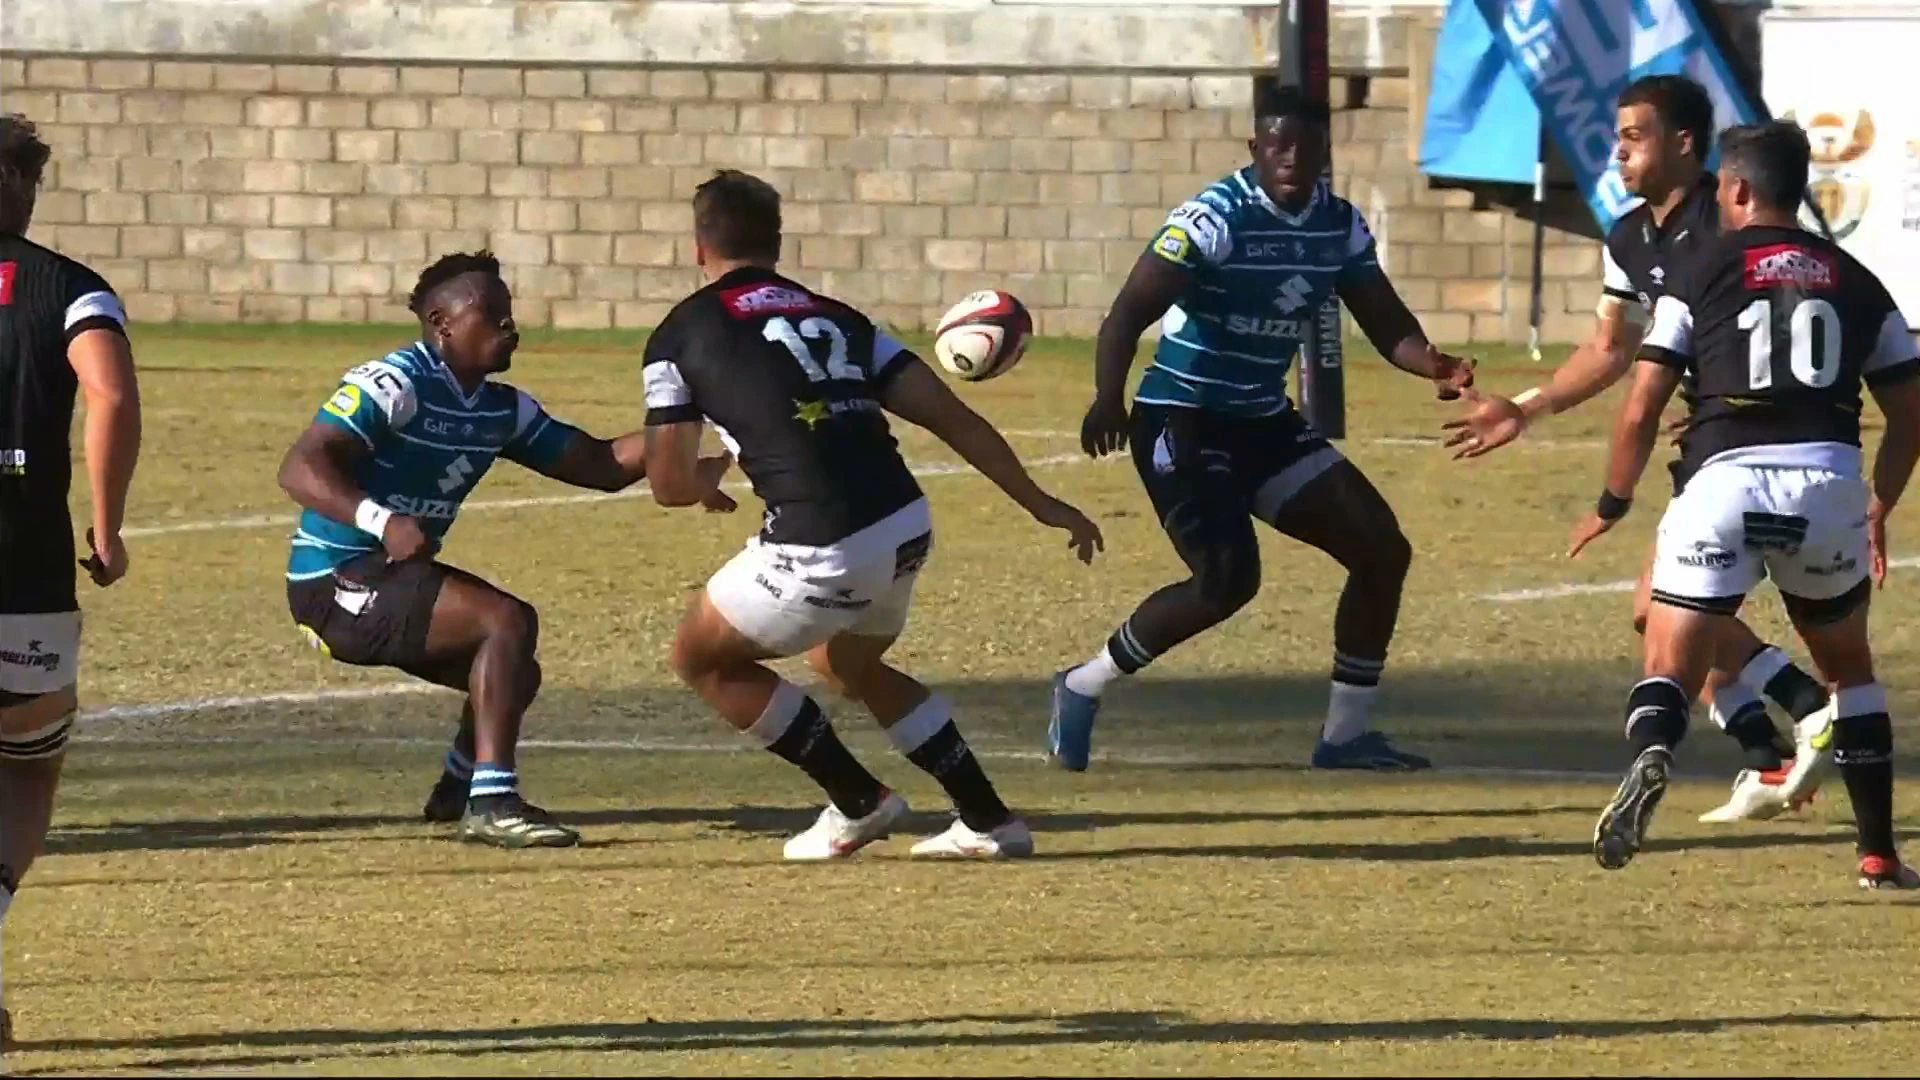 Griquas v Sharks | Match Highlights | Currie Cup Premier Division